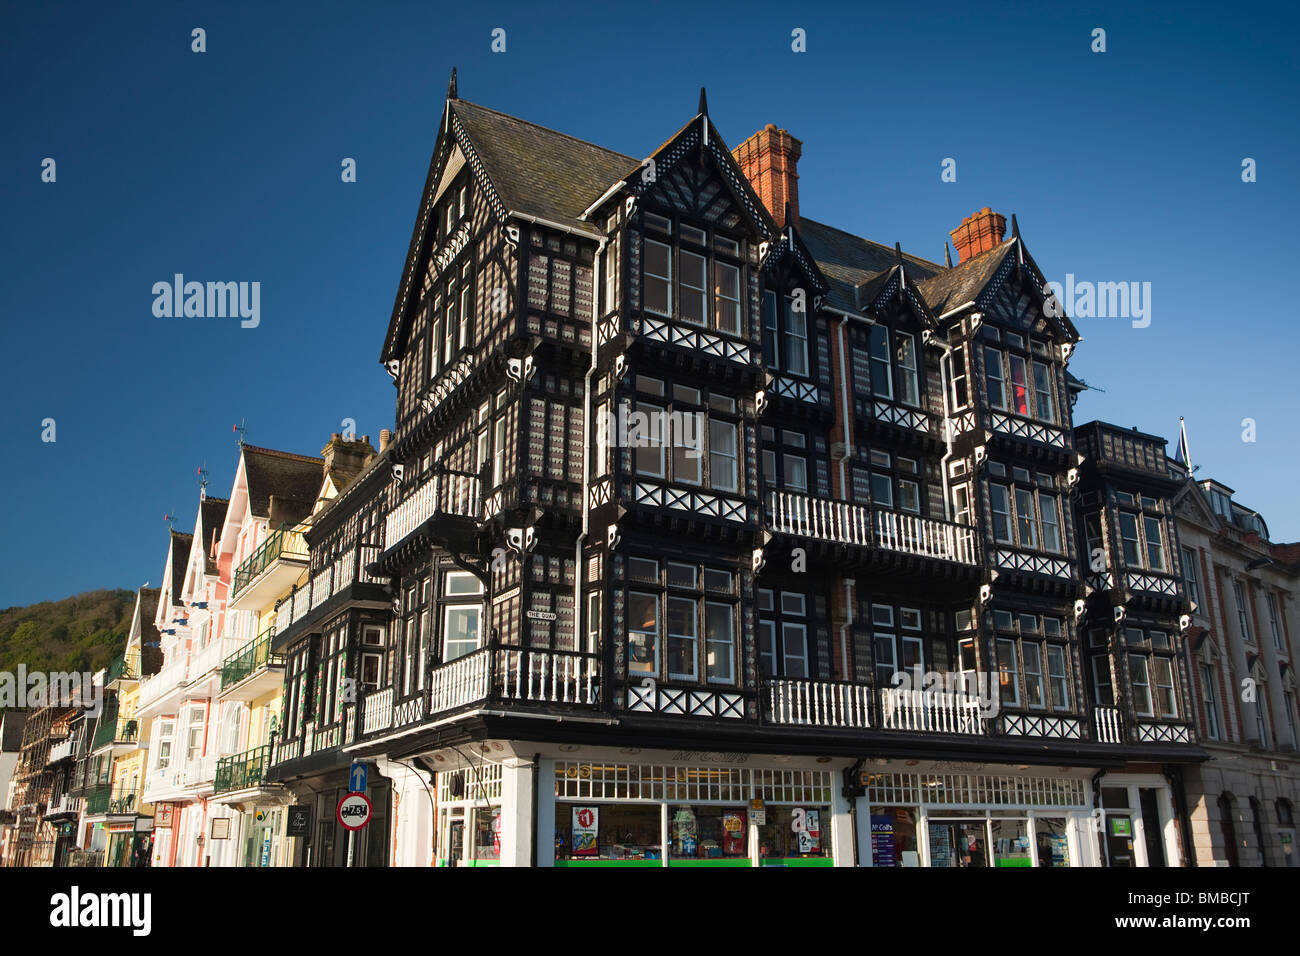 UK, England, Devon, Dartmouth, historic black and white Tudor style building overlooking the Boat Float, Stock Photo